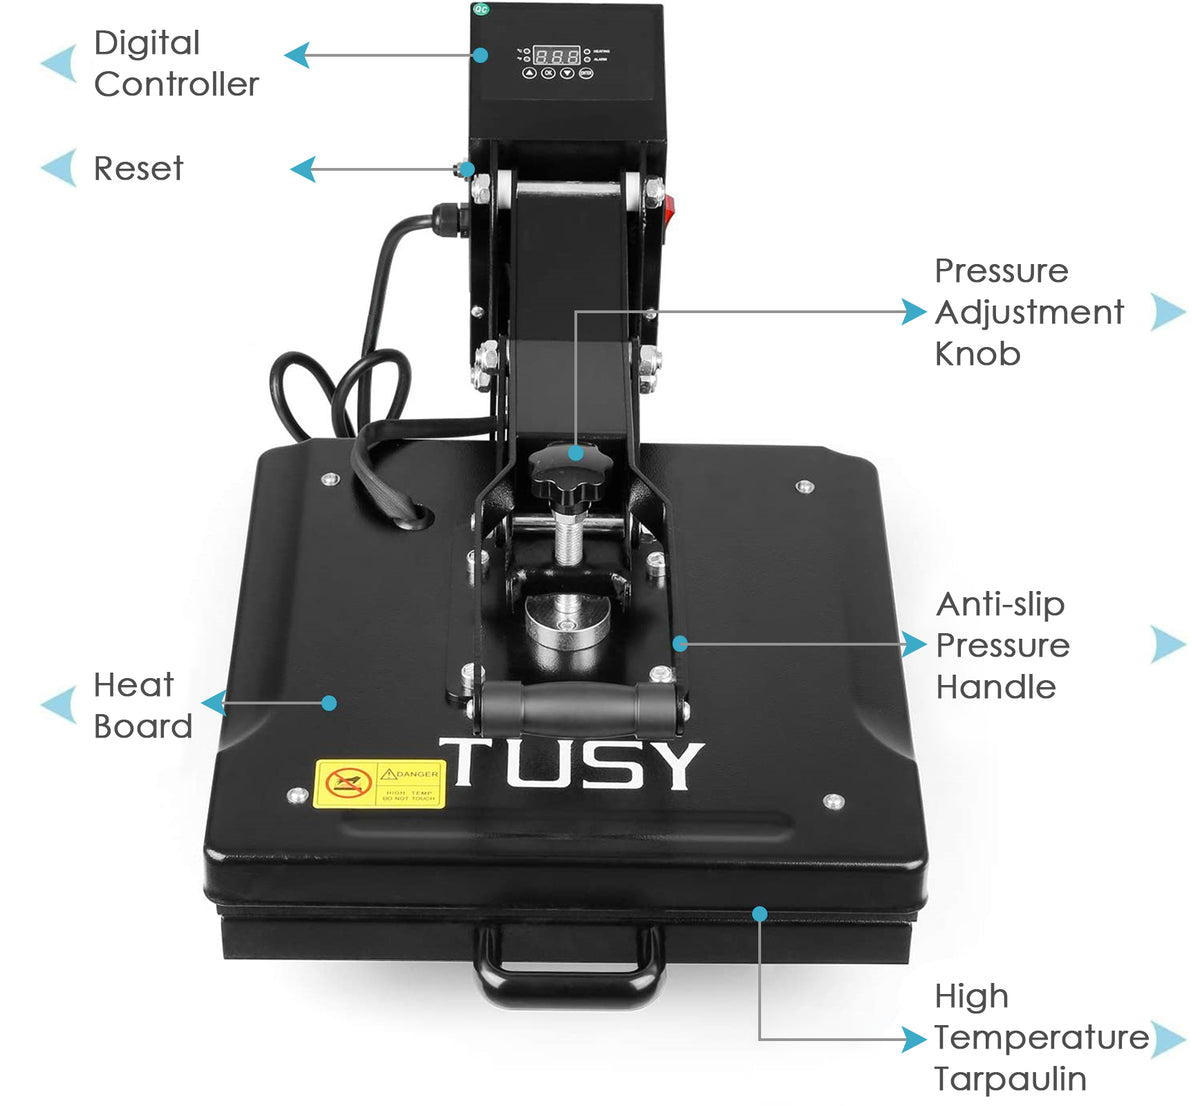 TUSY Auto Heat Press Machine, 15x15 Smart Heat Press Machine for T-Shirts  with Auto Release, Professional T-Shirt Press Machine for HTV, Sublimation